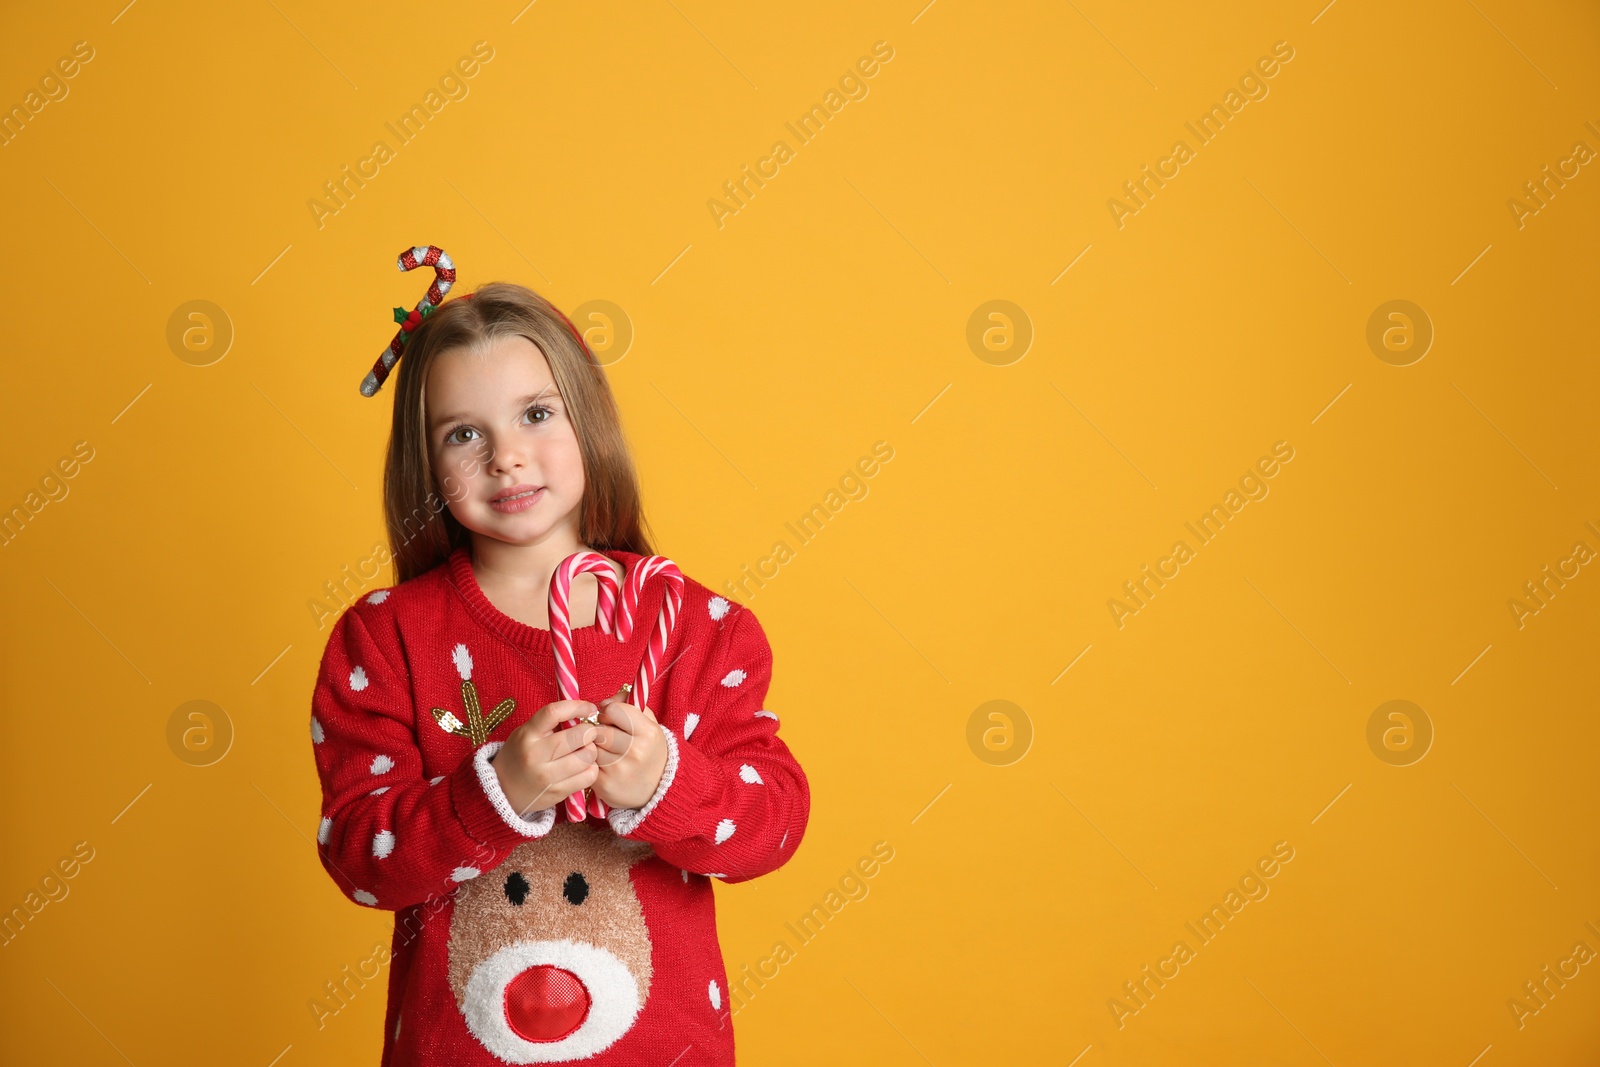 Photo of Cute little girl in Christmas sweater and festive headband holding candy canes on yellow background, space for text